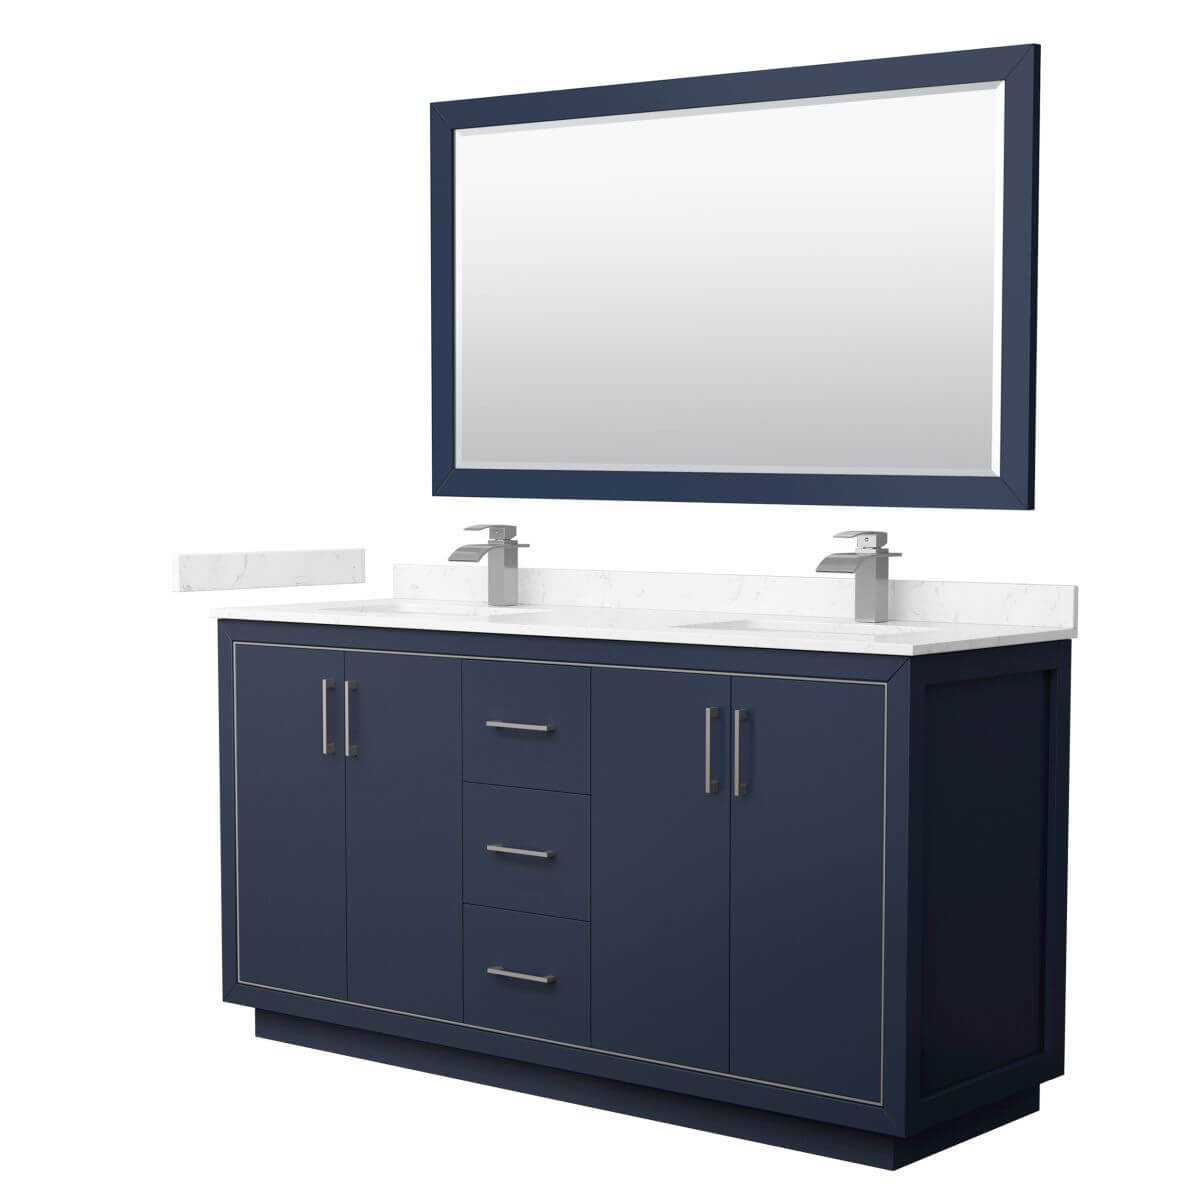 Wyndham Collection WCF111166DBNC2UNSM58 Icon 66 inch Double Bathroom Vanity in Dark Blue with Carrara Cultured Marble Countertop, Undermount Square Sinks, Brushed Nickel Trim and 58 Inch Mirror